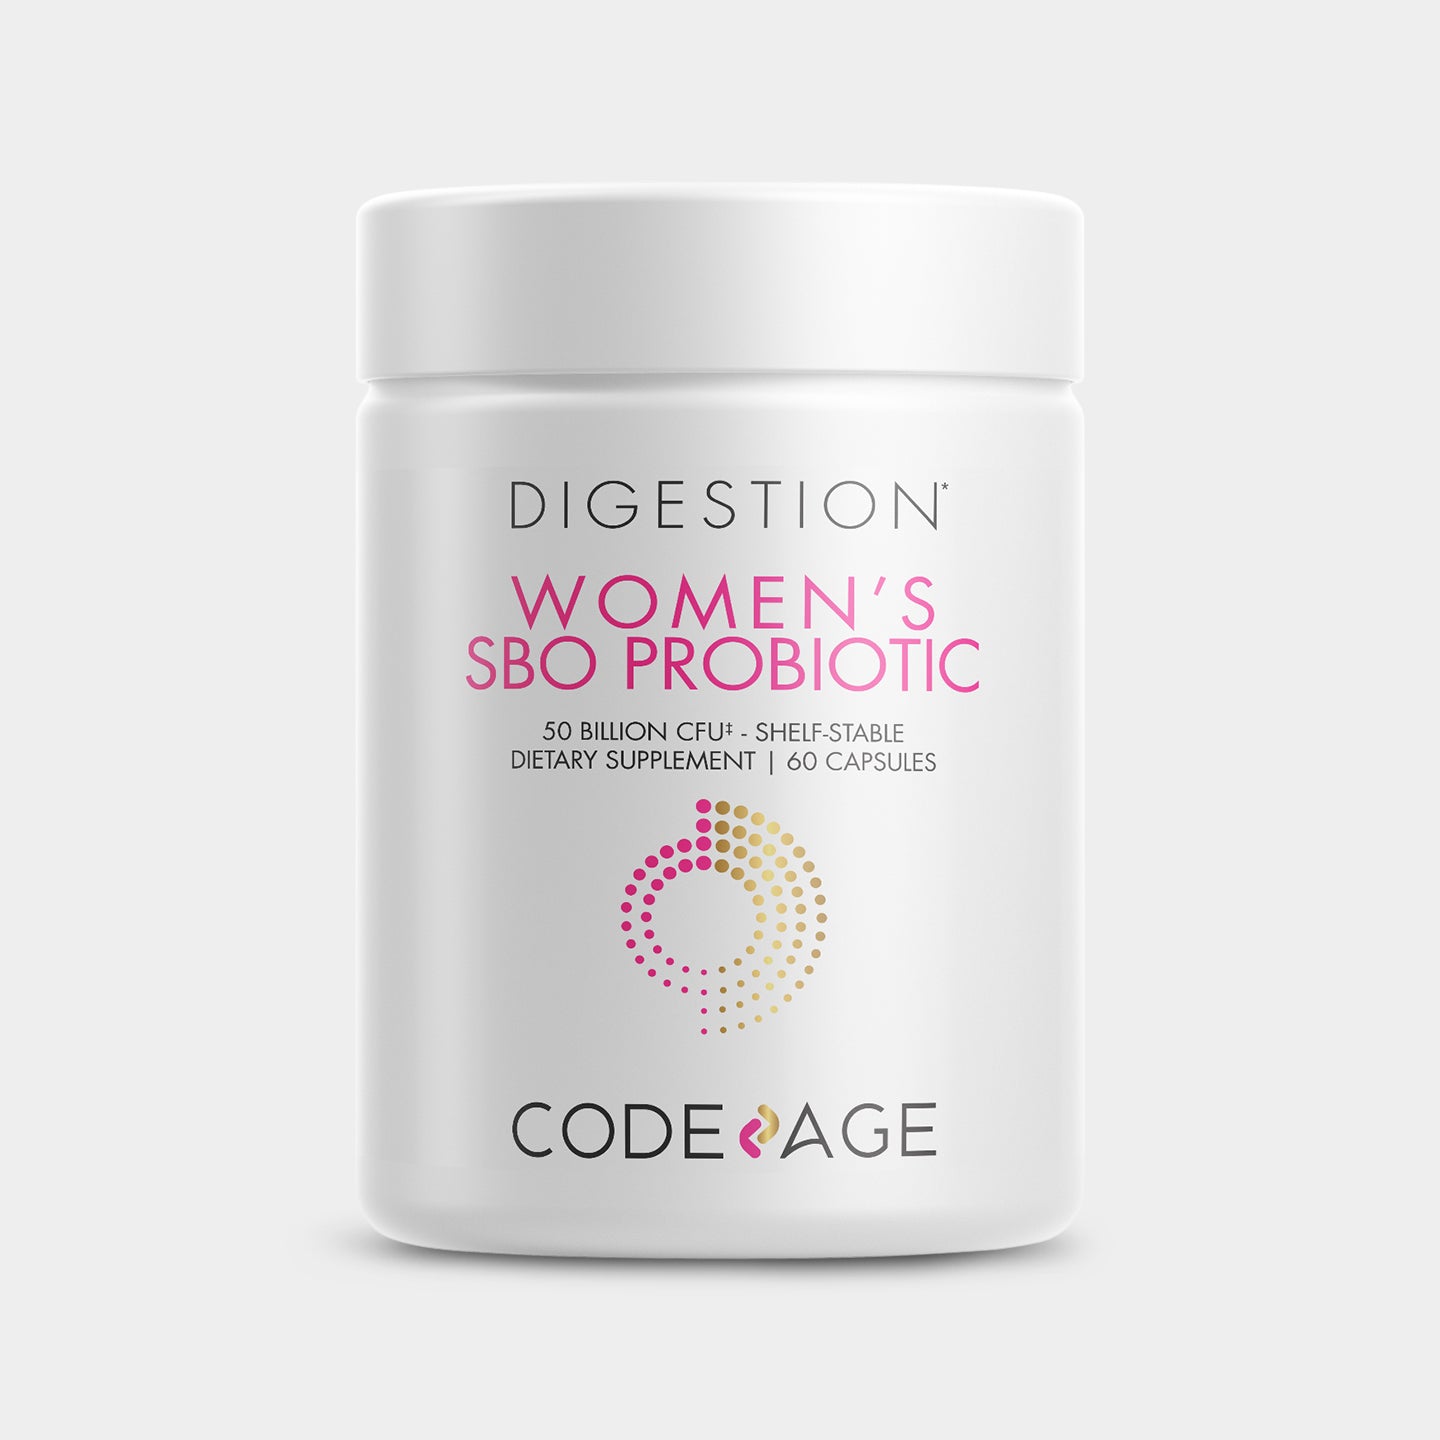 Codeage Digestion Women's SBO Probiotic Supplement  A1